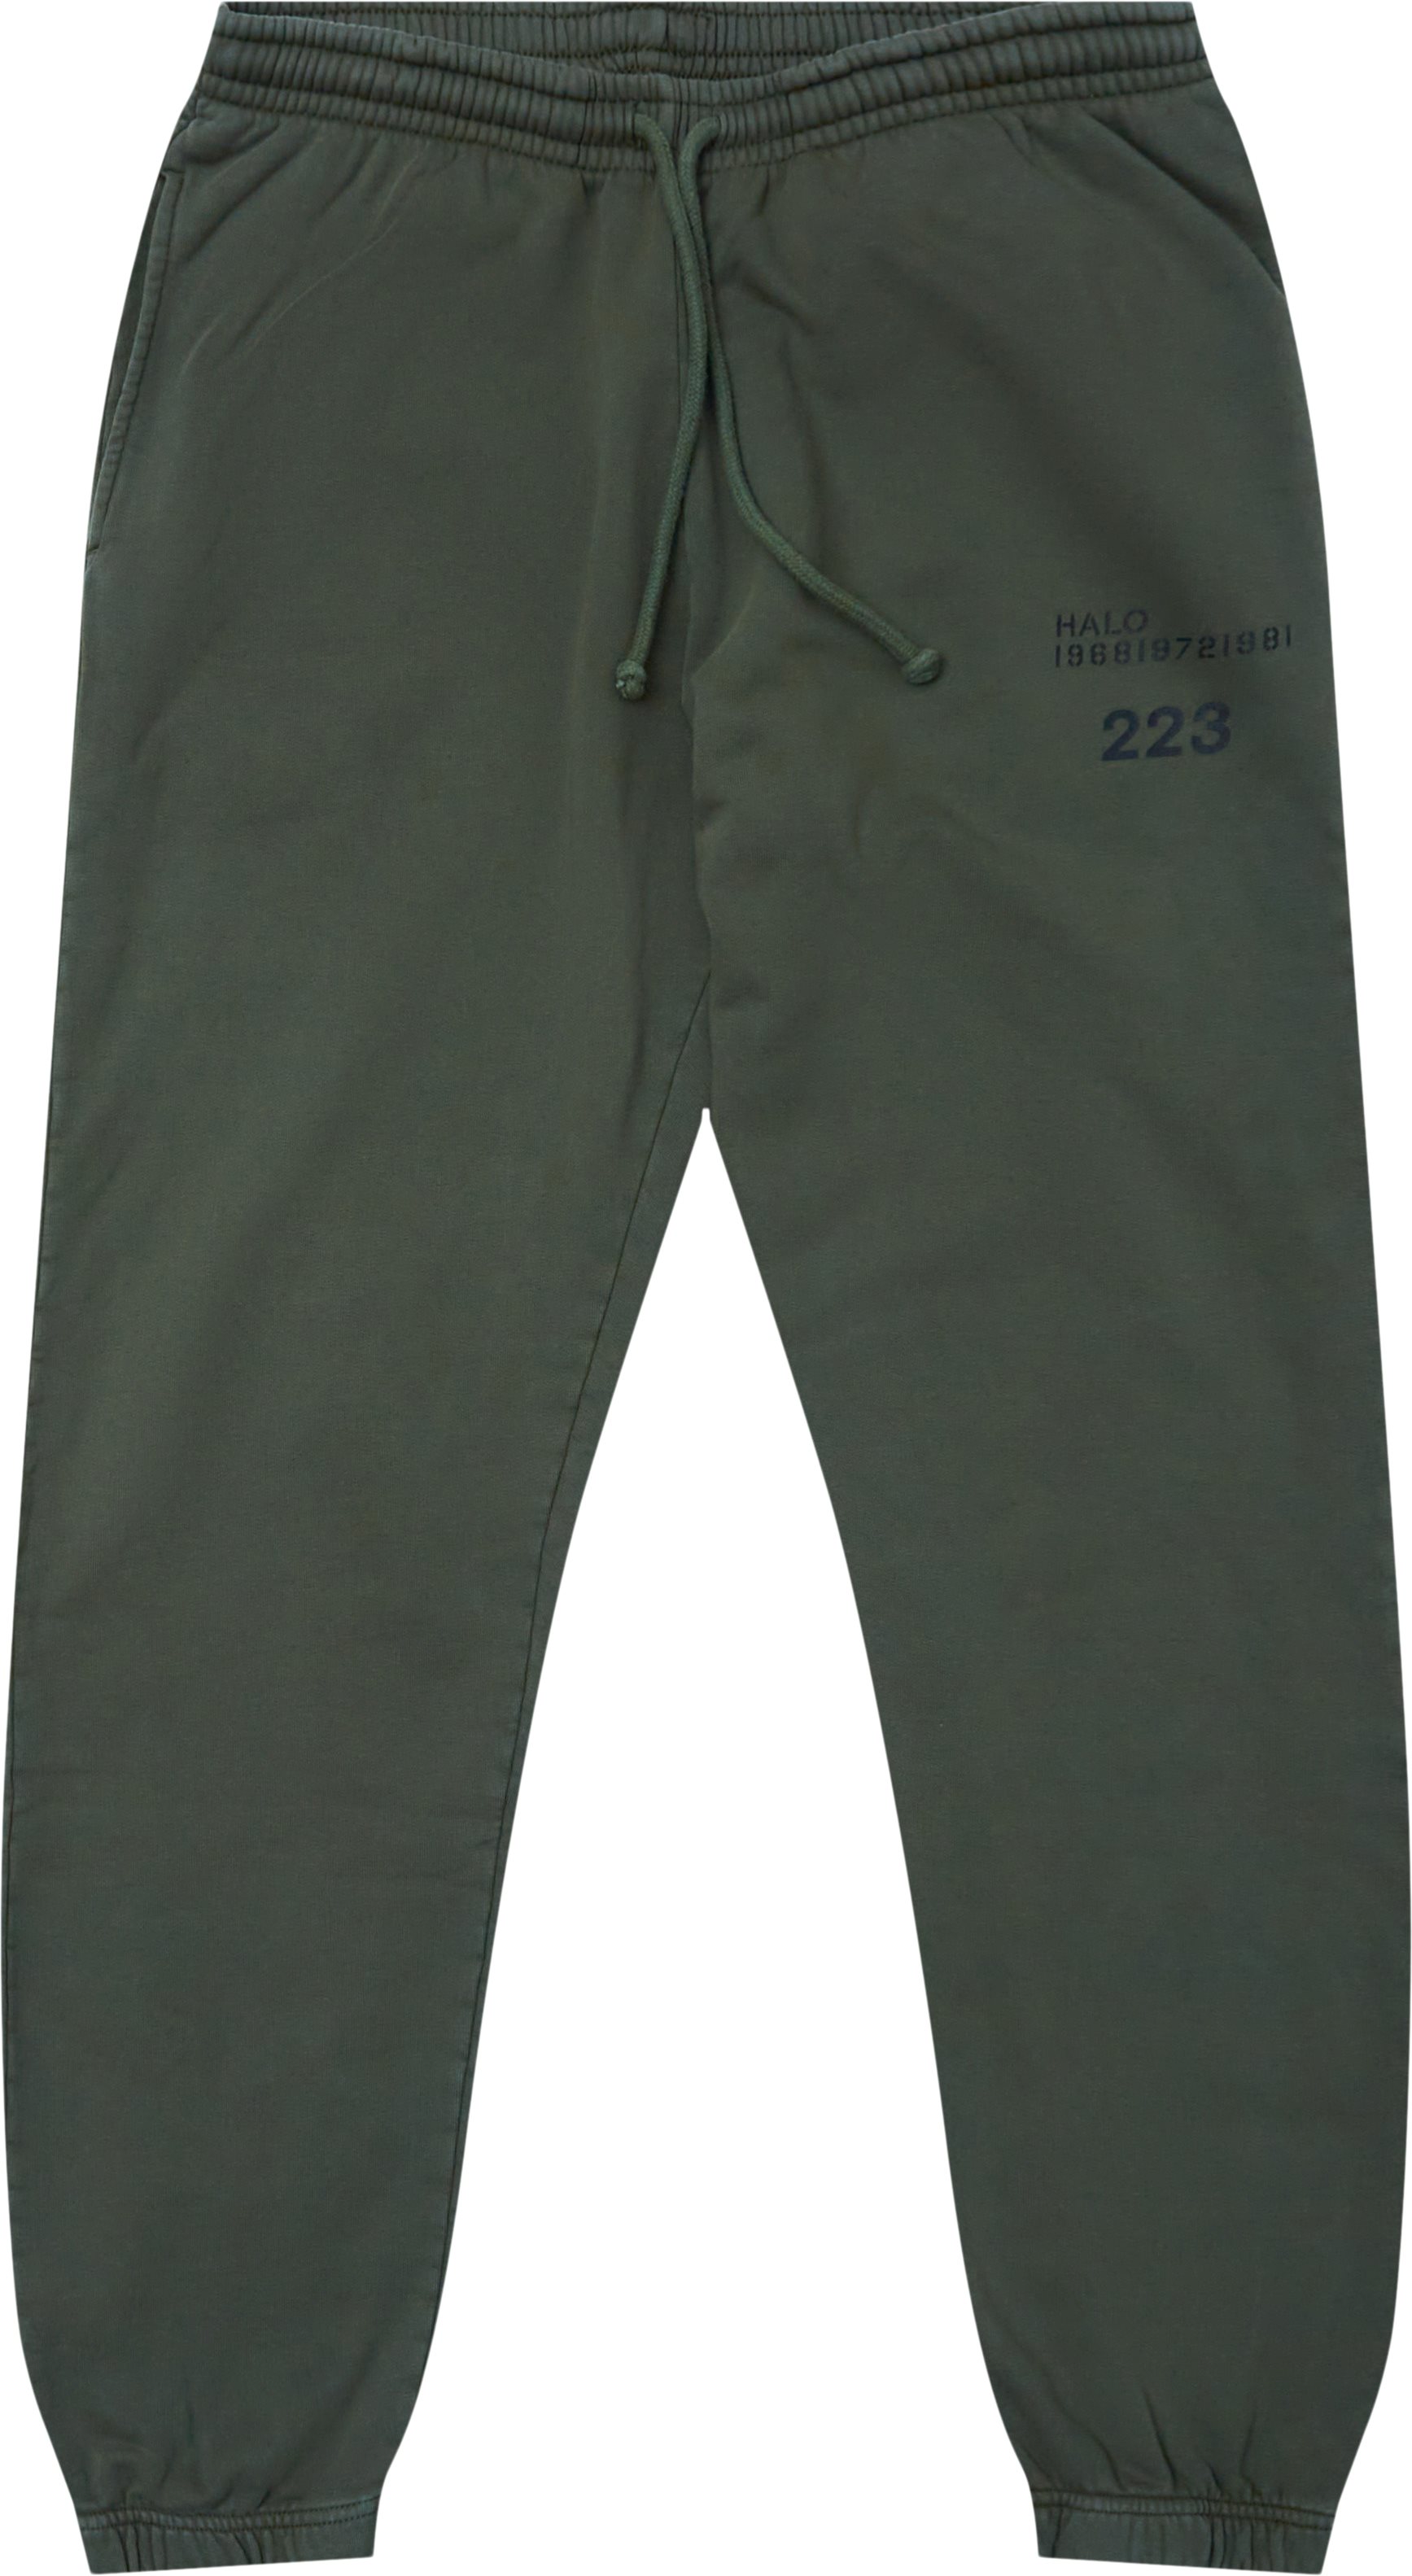 Cotton Sweatpant - Trousers - Regular fit - Army